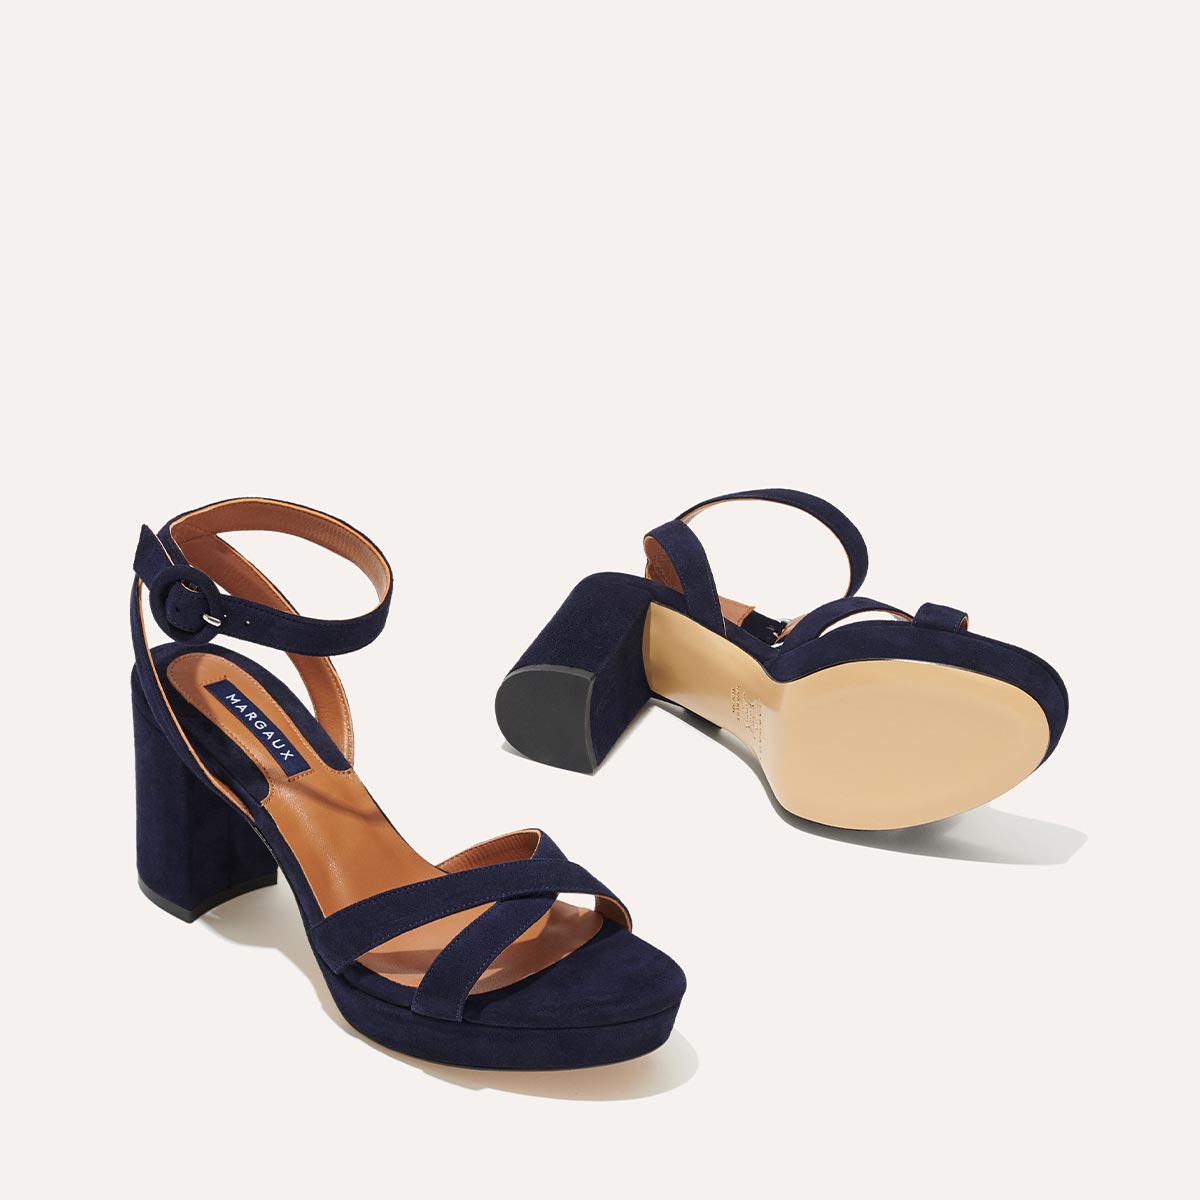 Margaux's classic and comfortable City Sandal in navy blue Italian suede with crossed straps and a walkable block heel